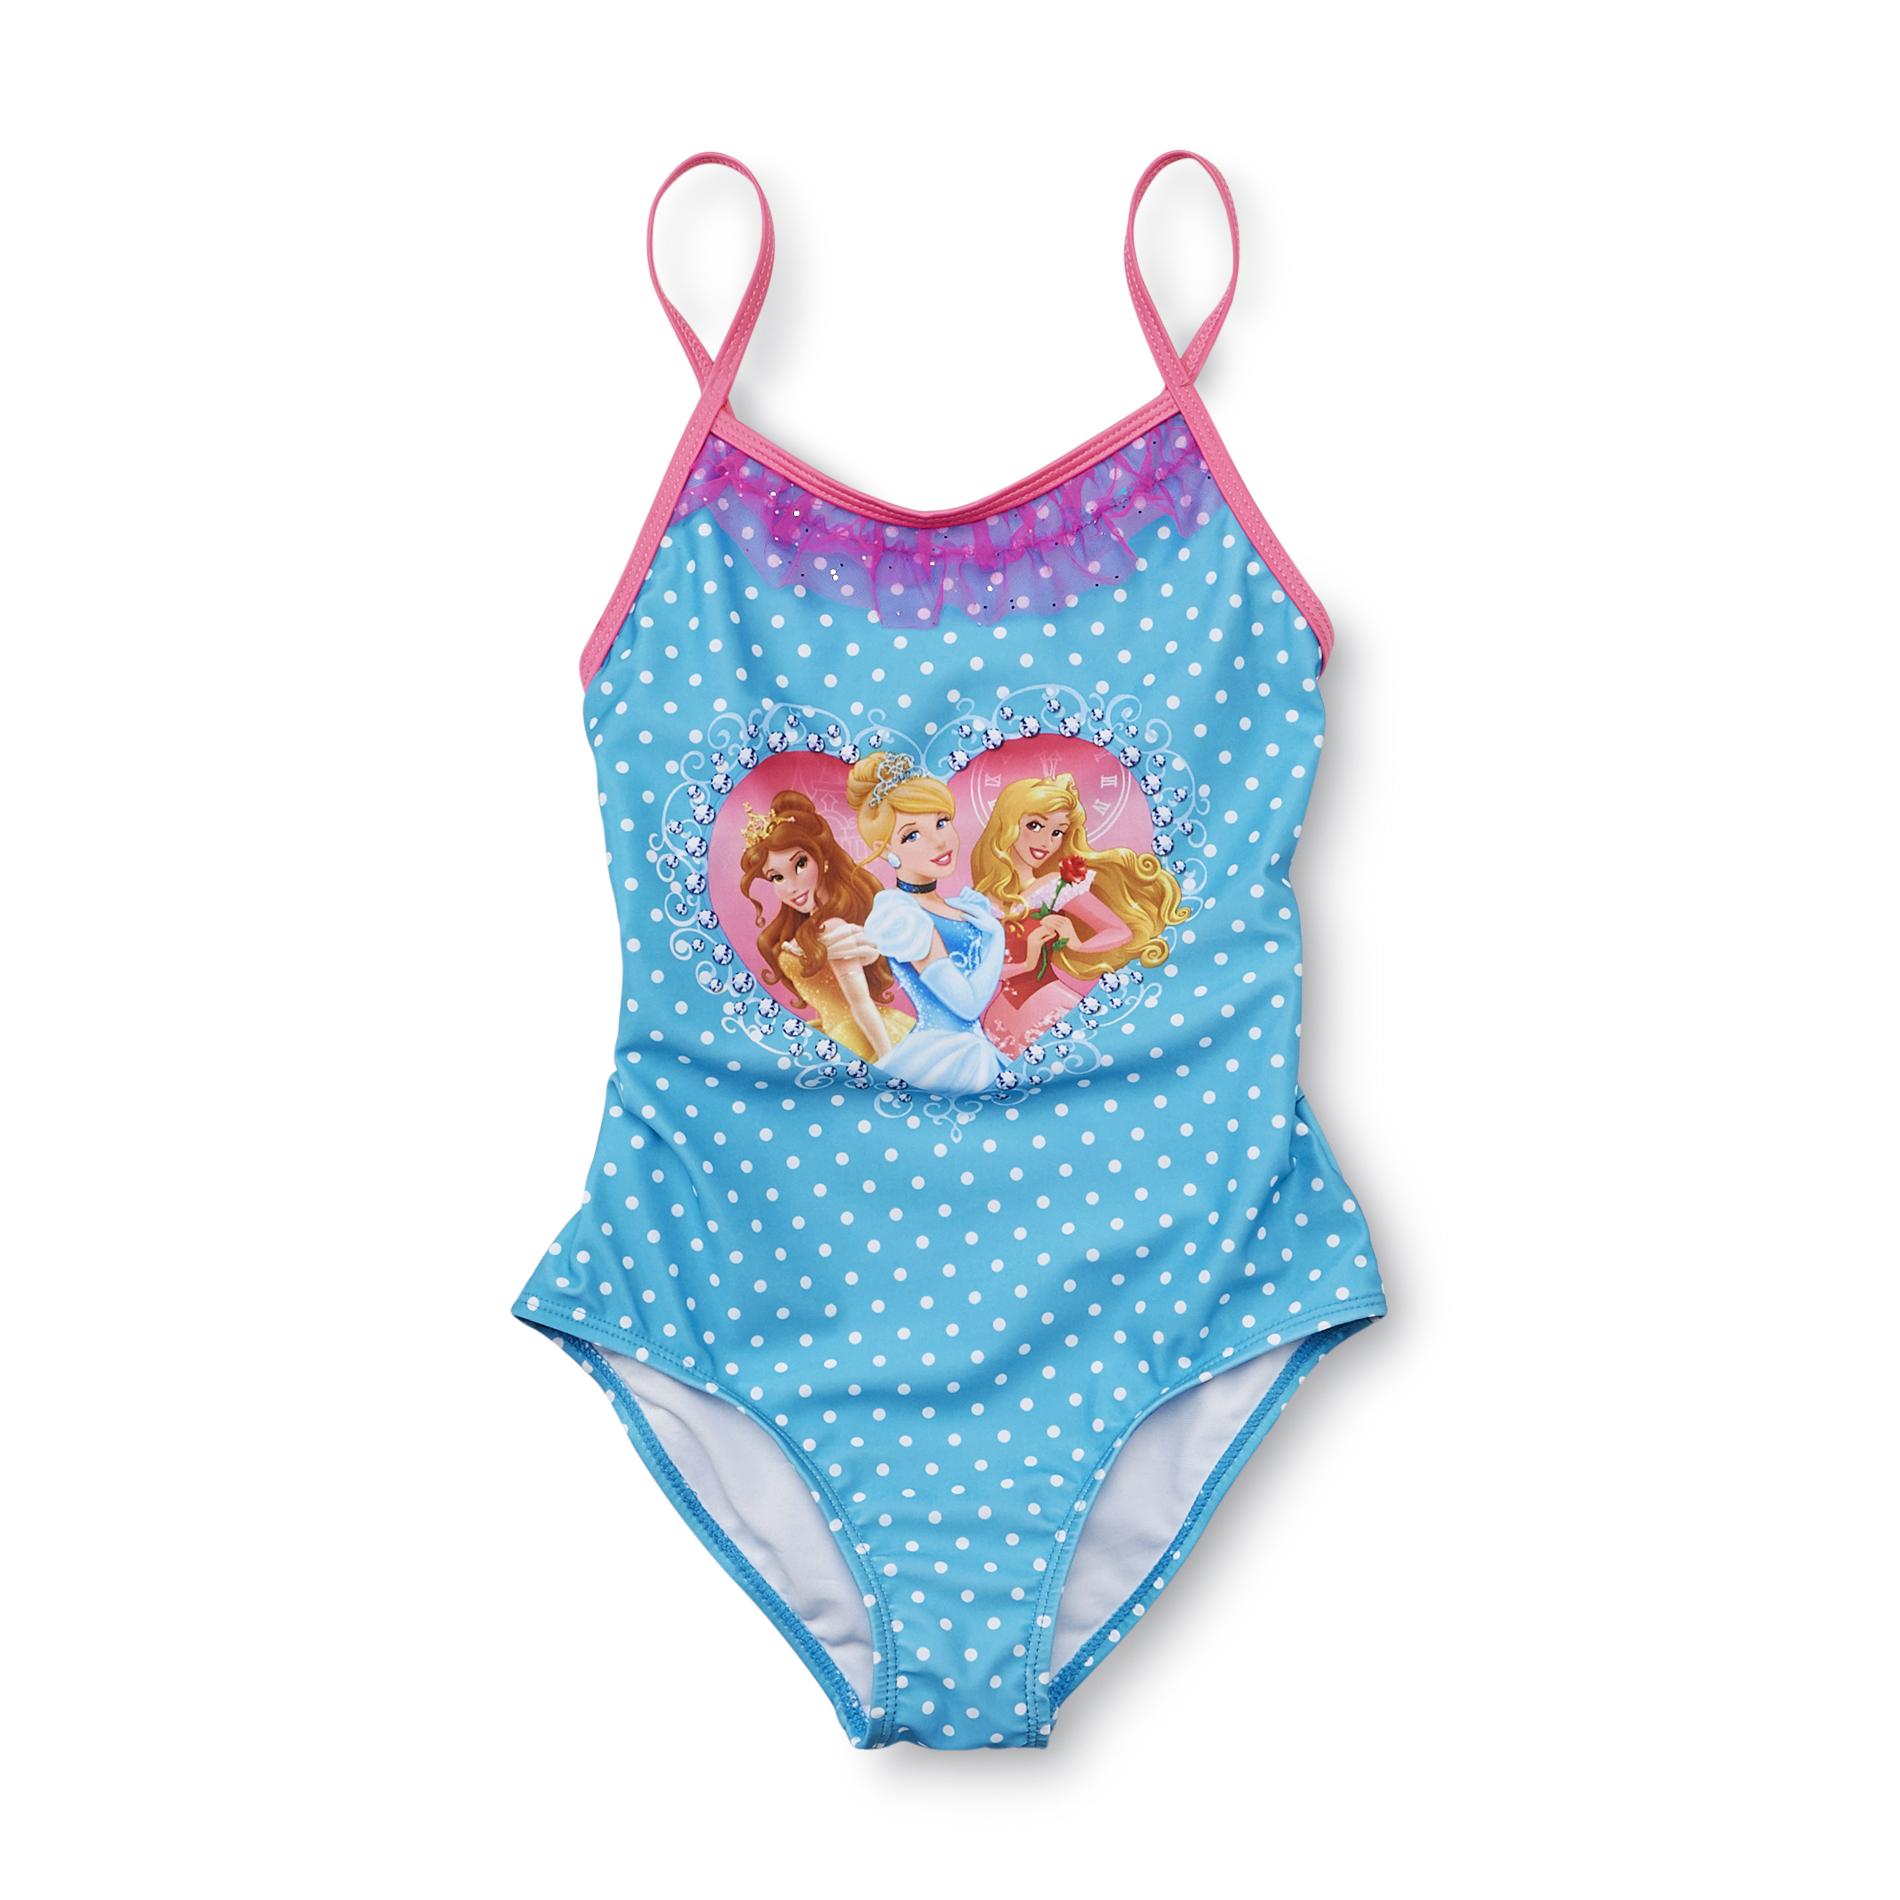 Disney Princesses Girl's Swimsuit - Dotted